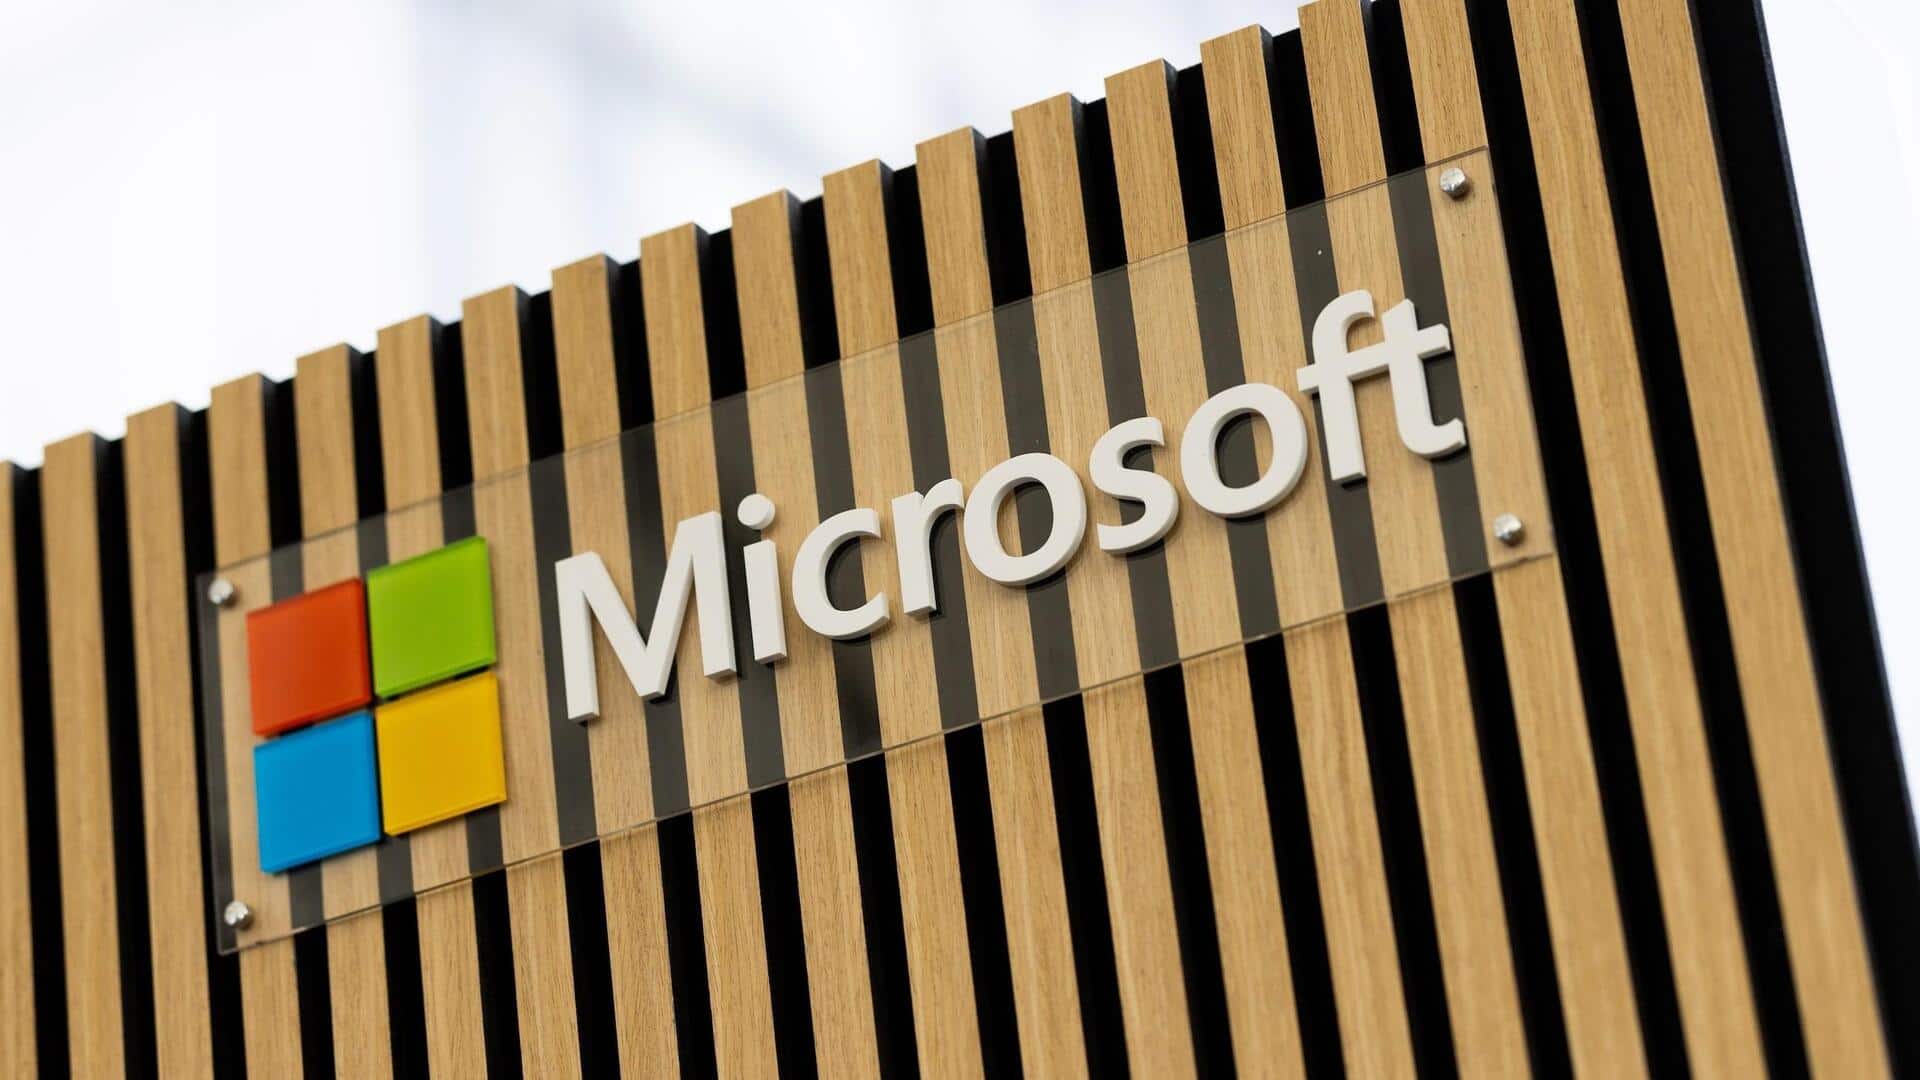 Microsoft owes $29bn in back taxes, says US tax body